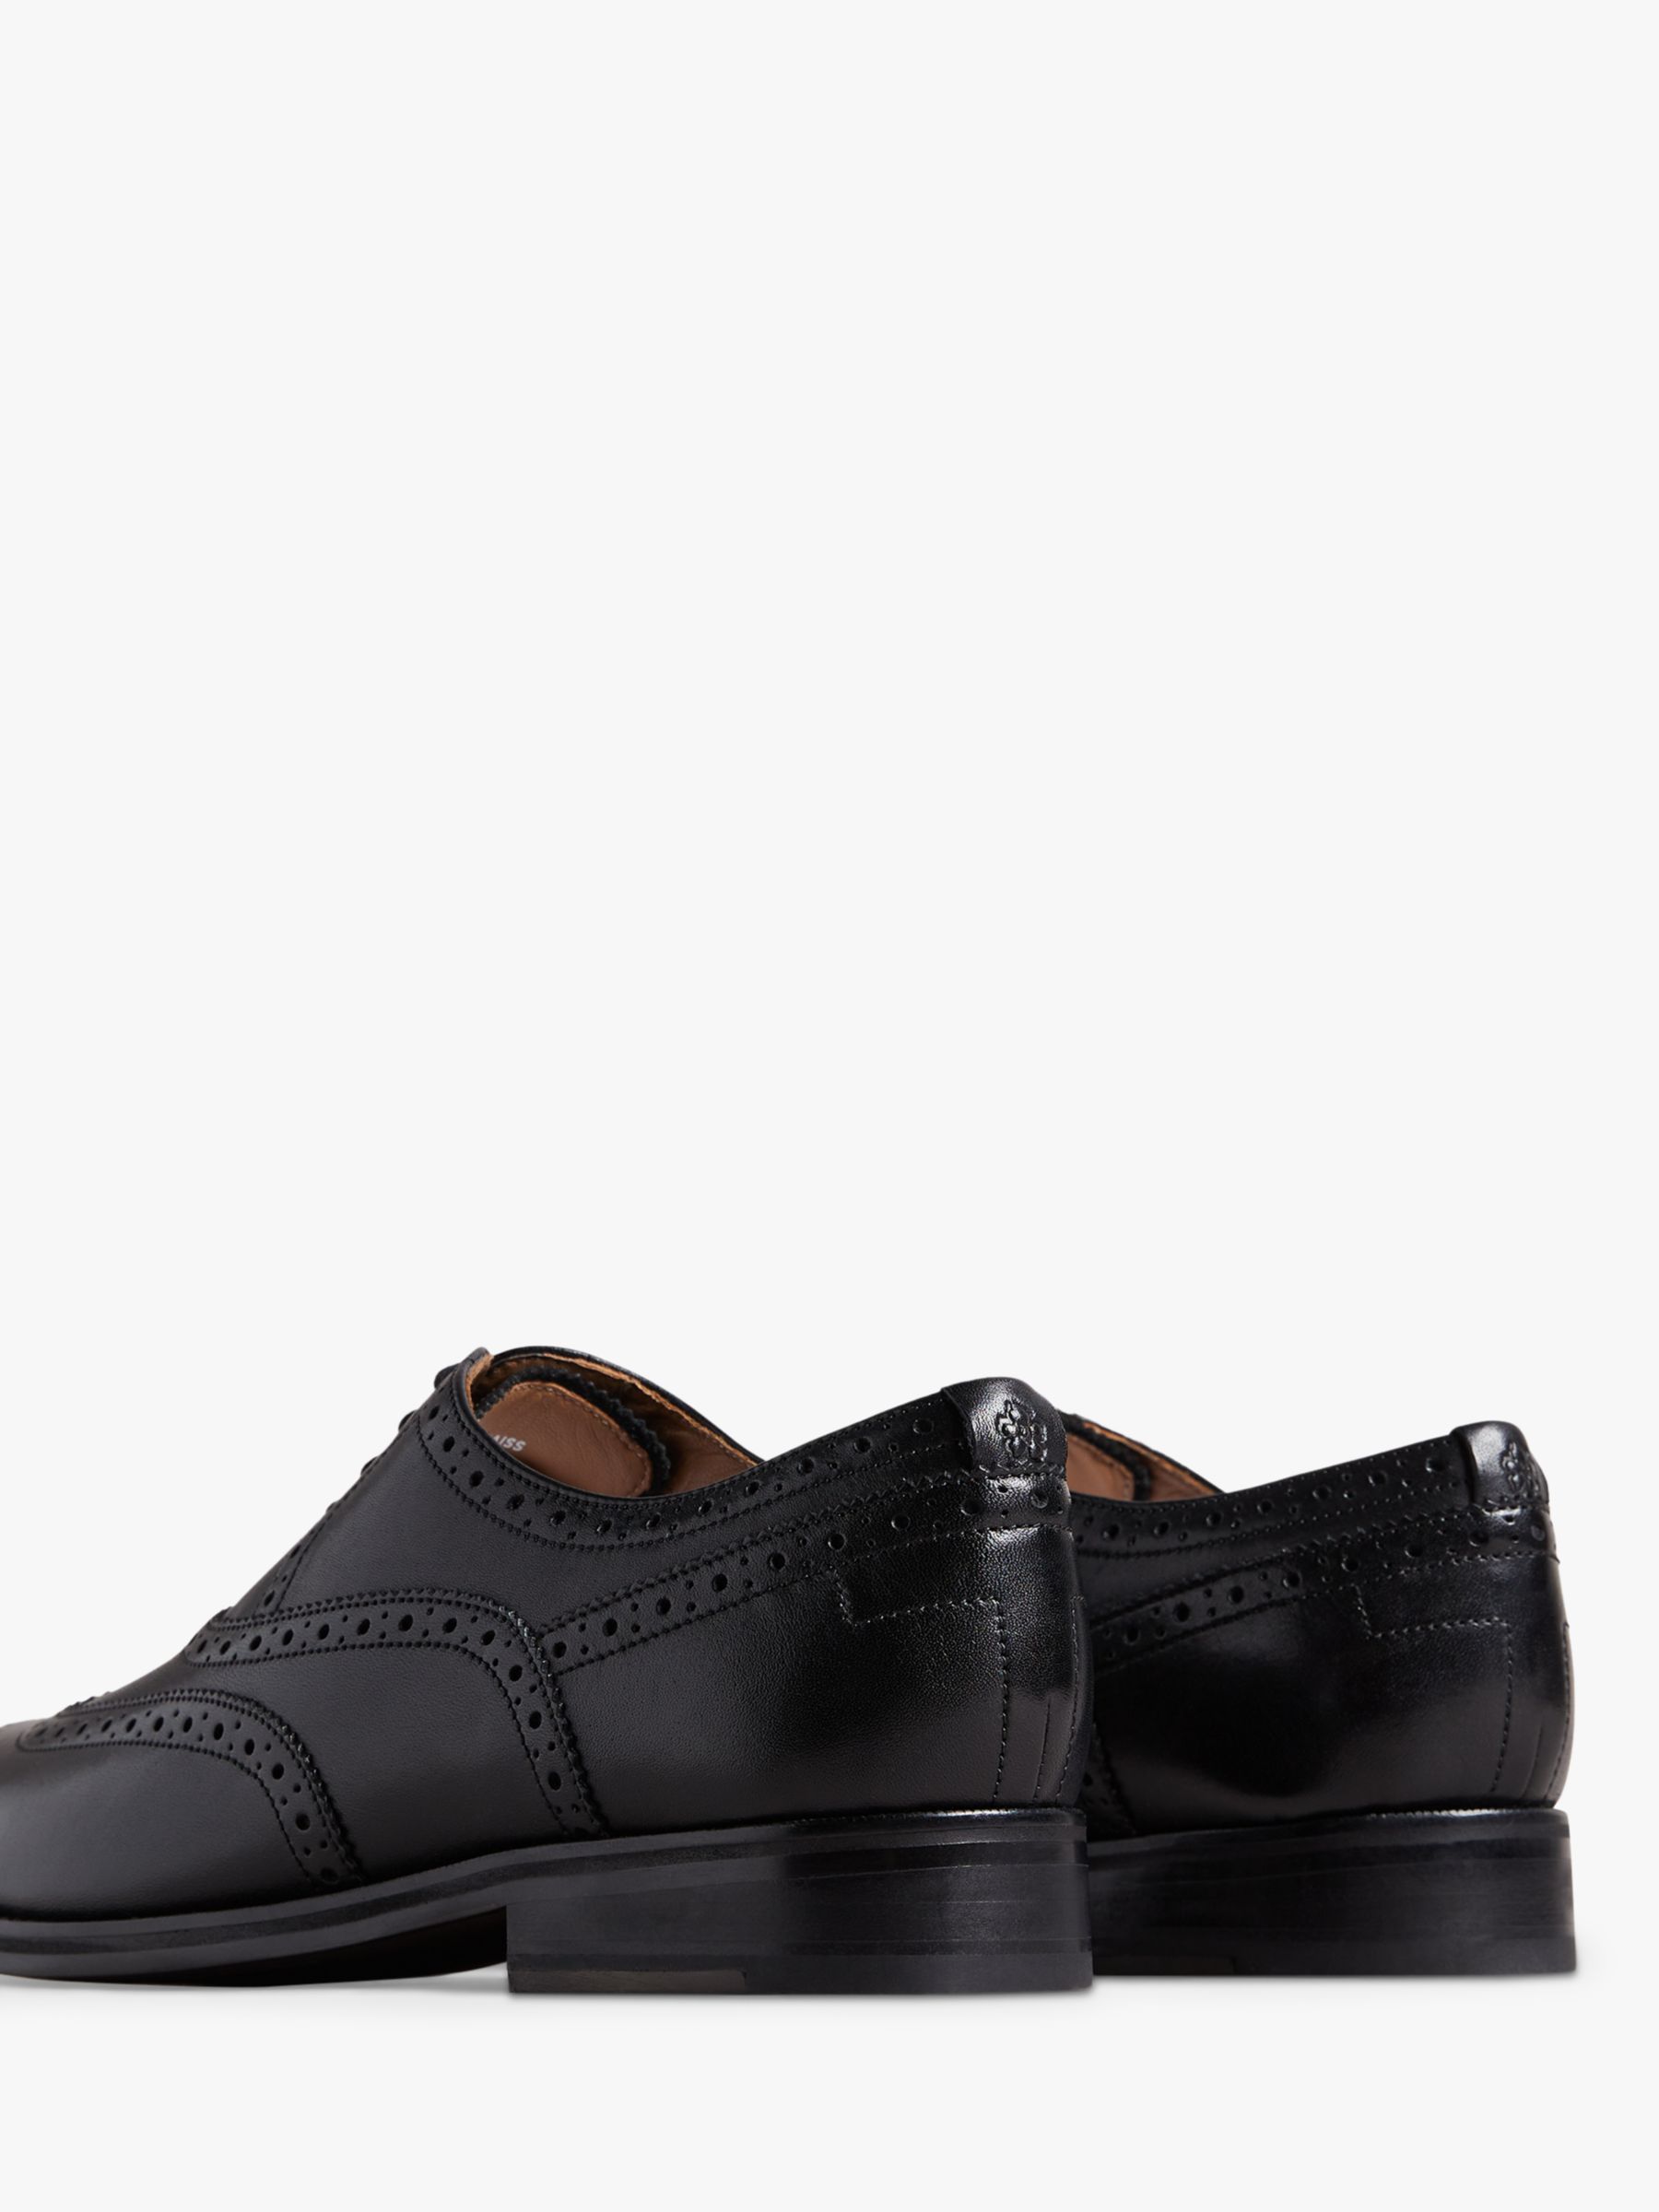 Buy Ted Baker Amaiss Leather Brogues Online at johnlewis.com